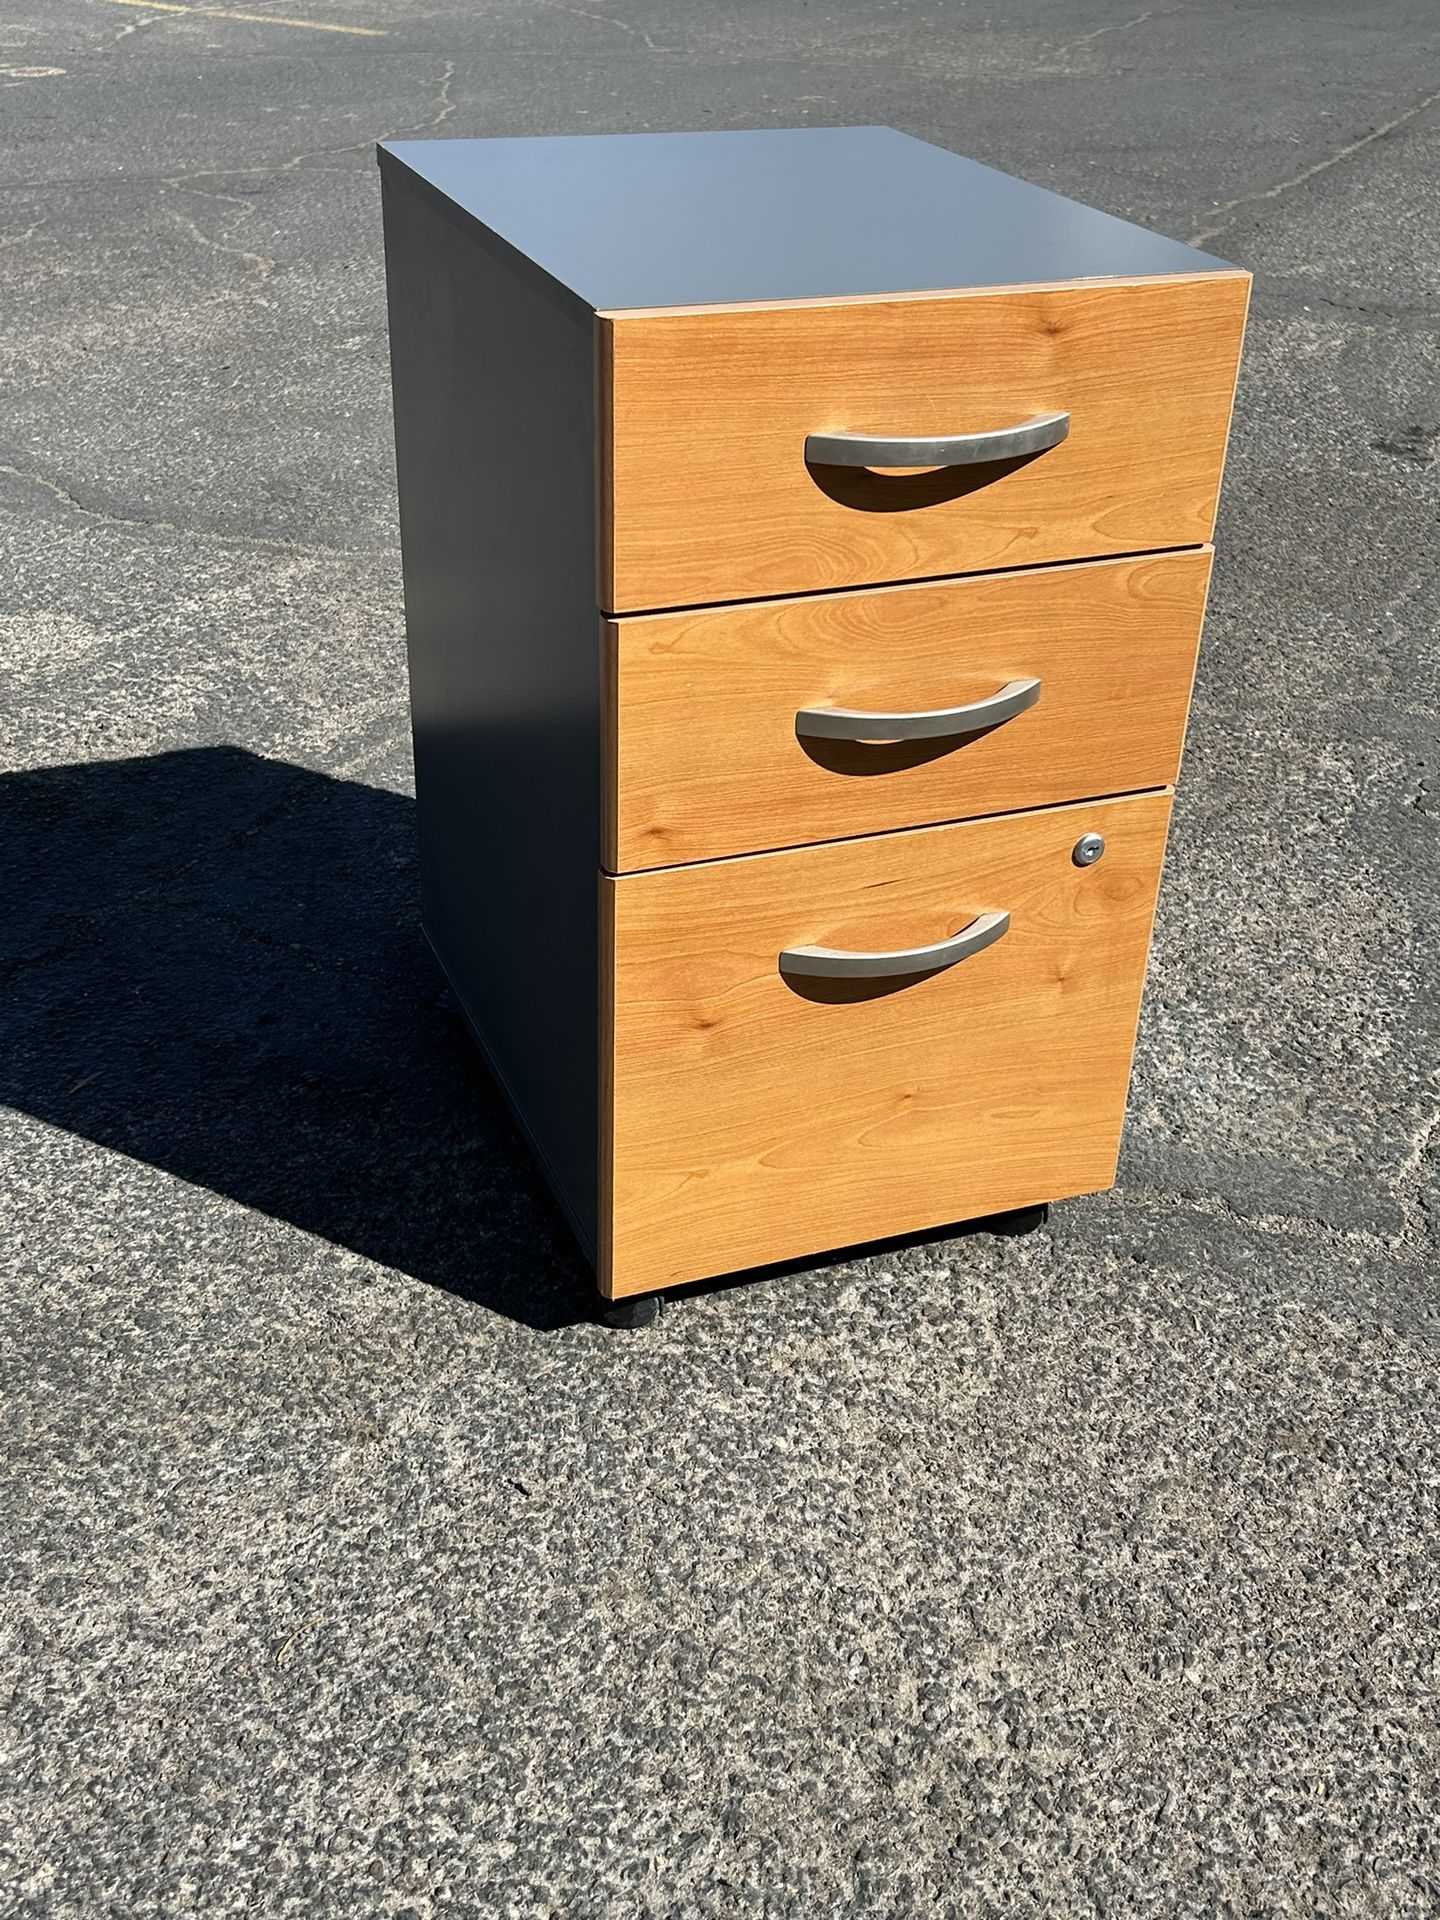 Nice 3 Drawer File Cabinet With Wheels- $30 Firm 